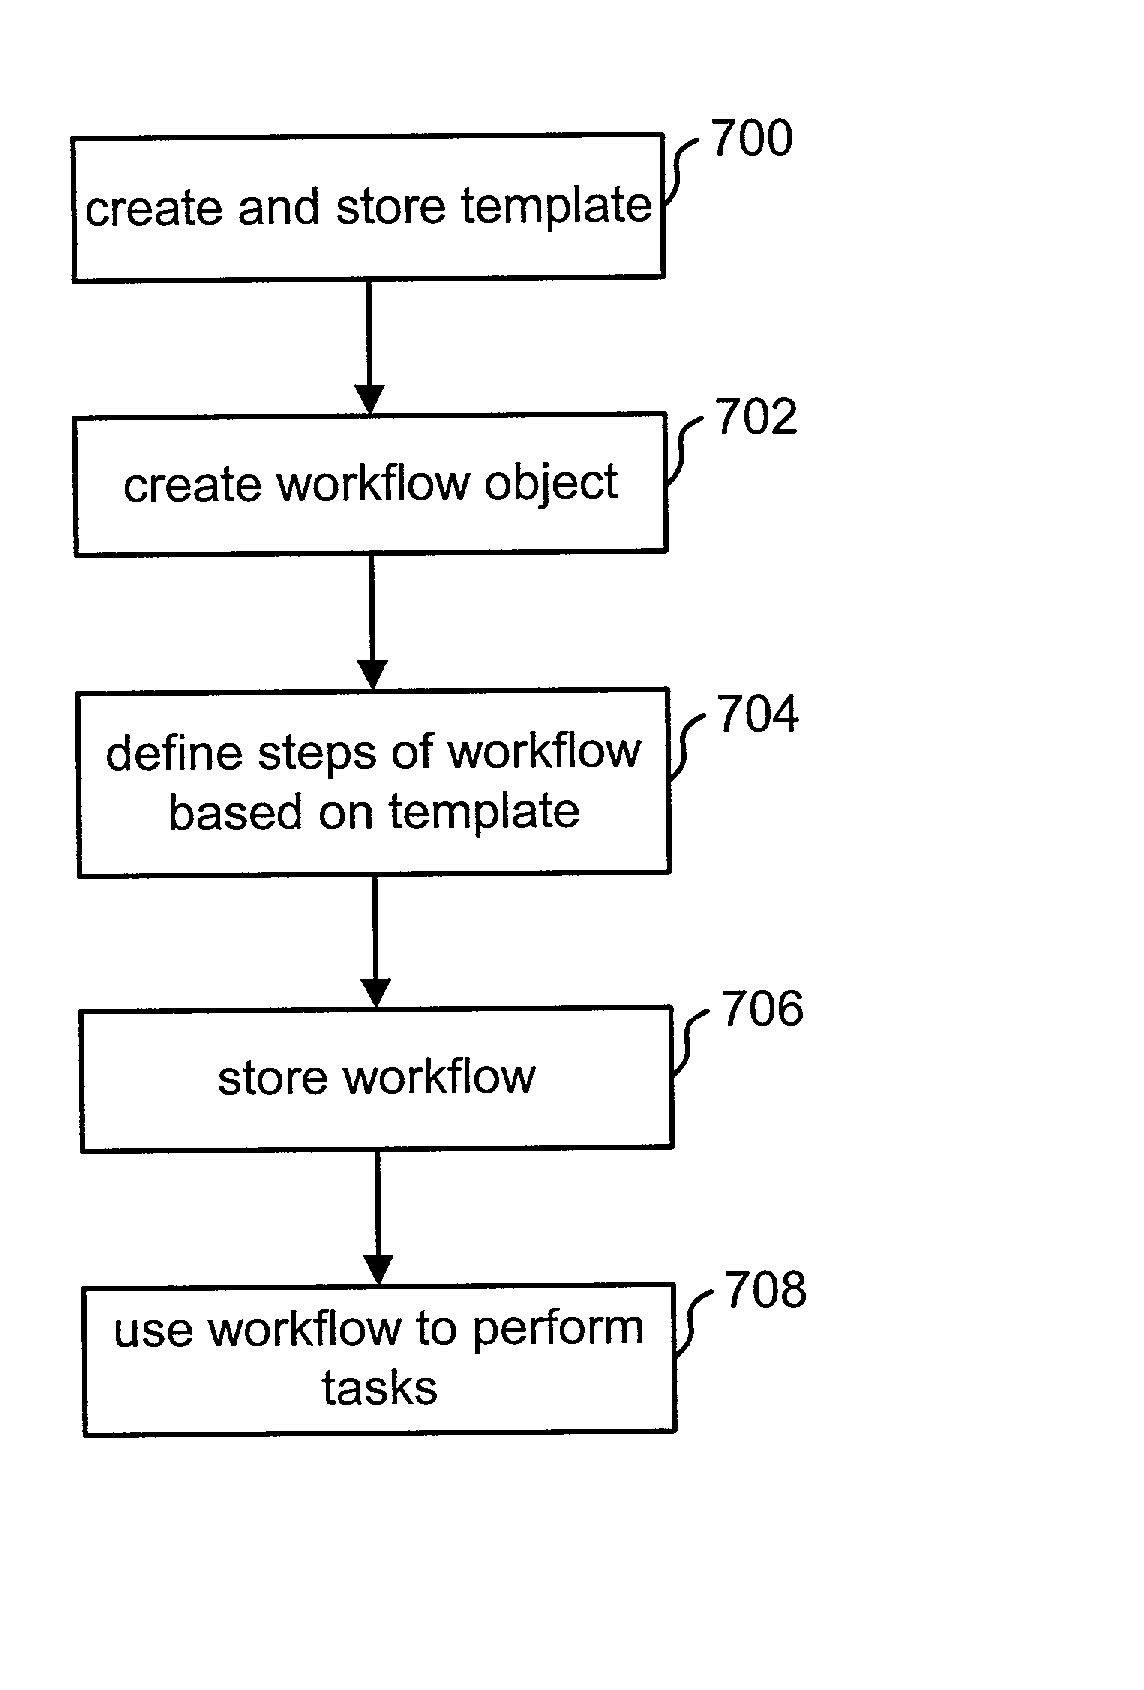 Template based workflow definition